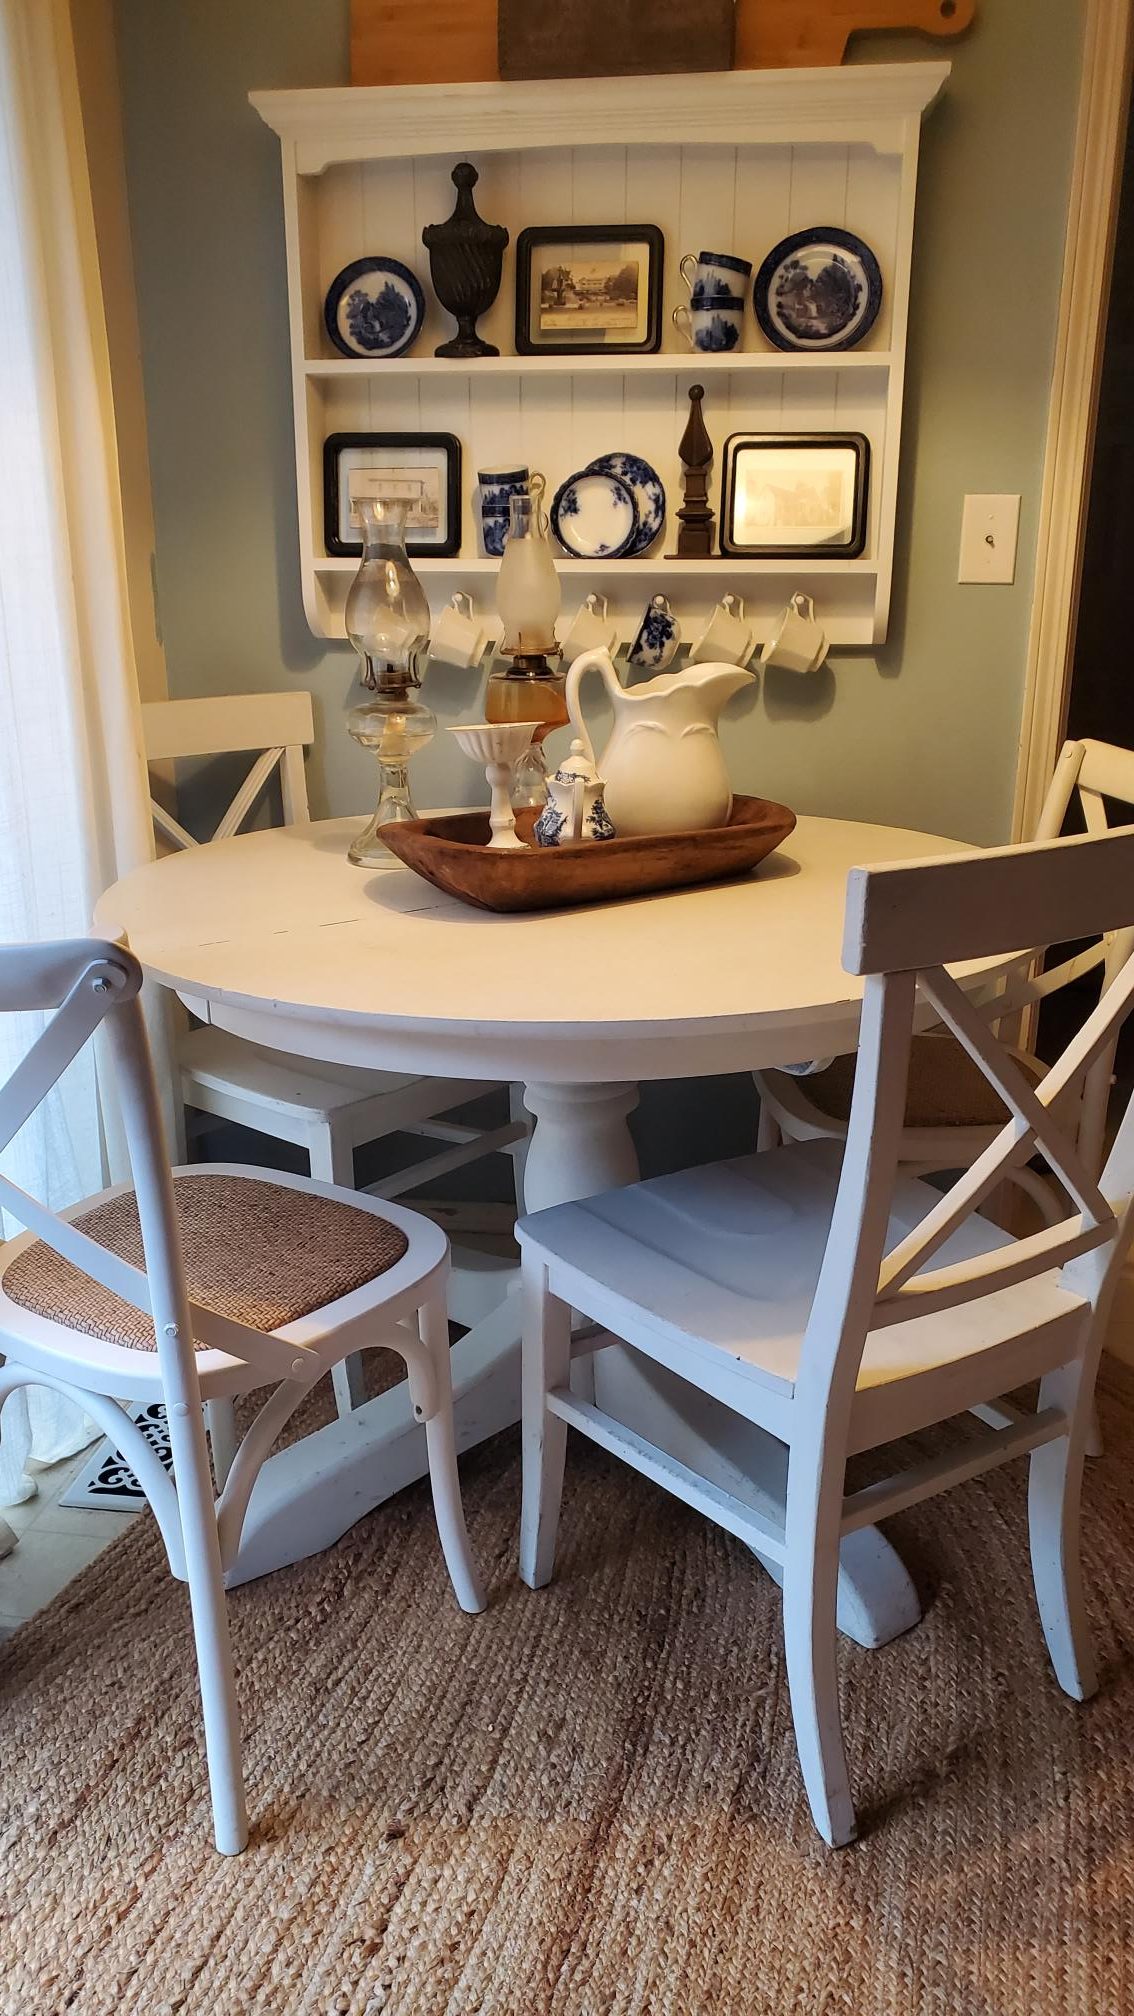 Breakfast nook. Round white table with 4 chairs.